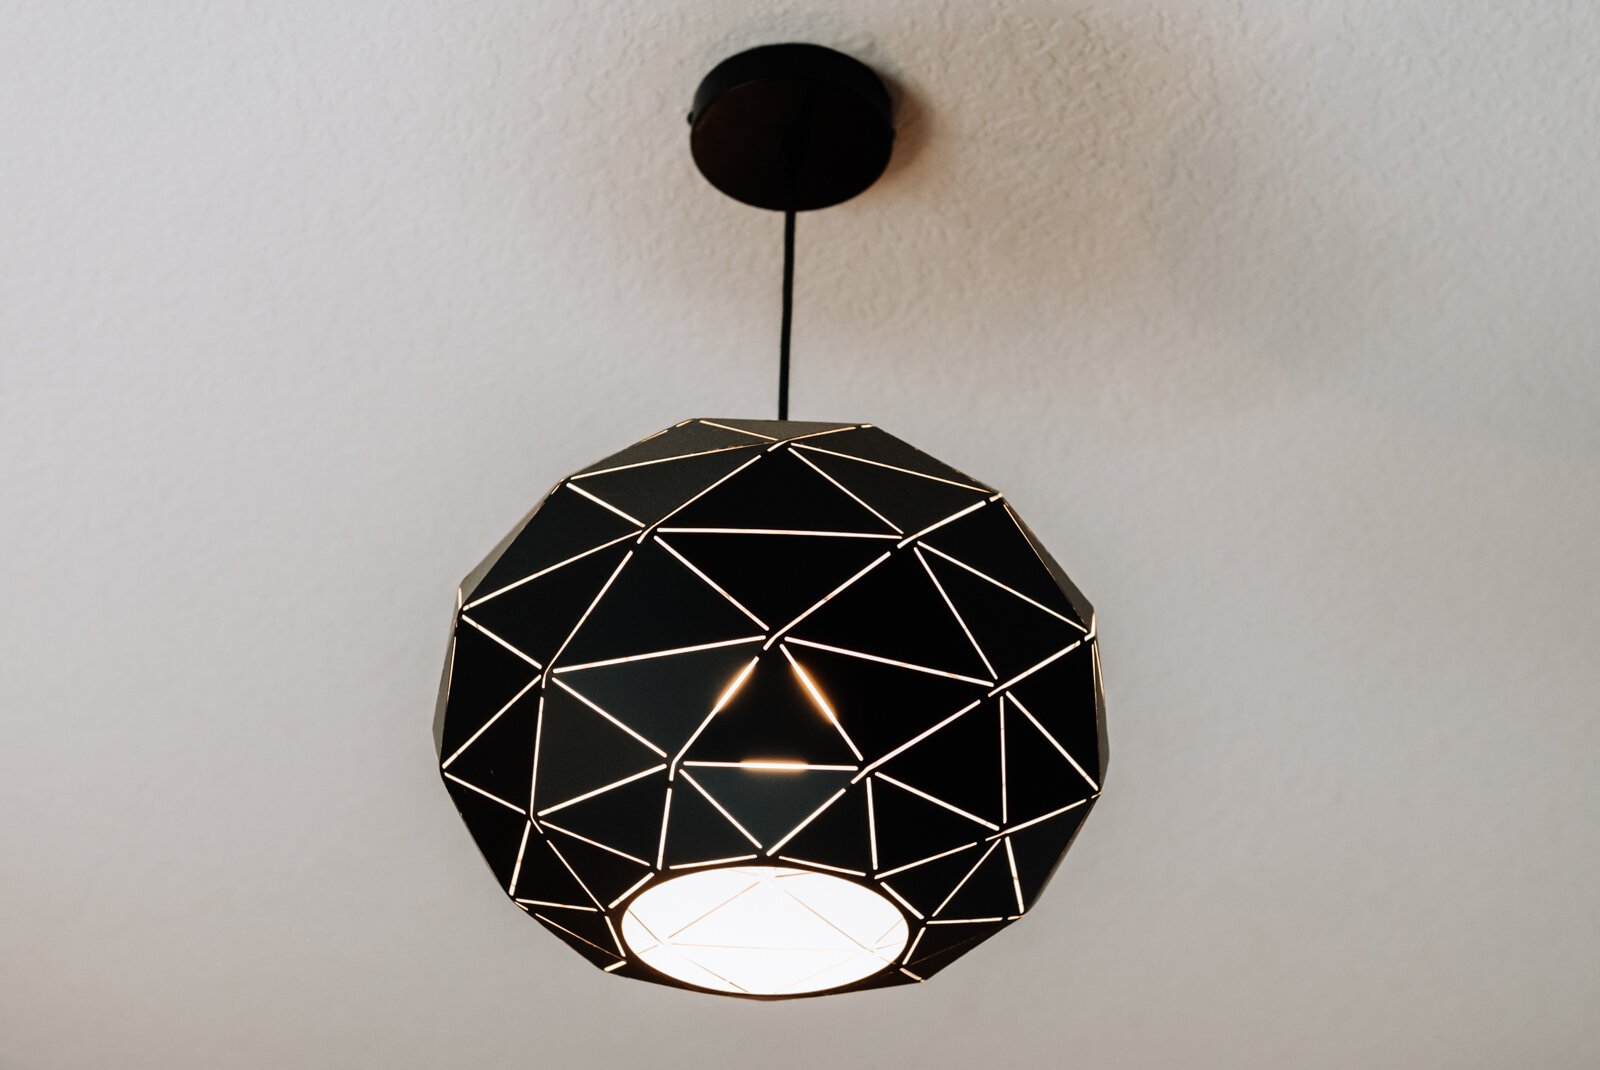 A geometric bedroom light feature in the back bedroom on the bottom floor.